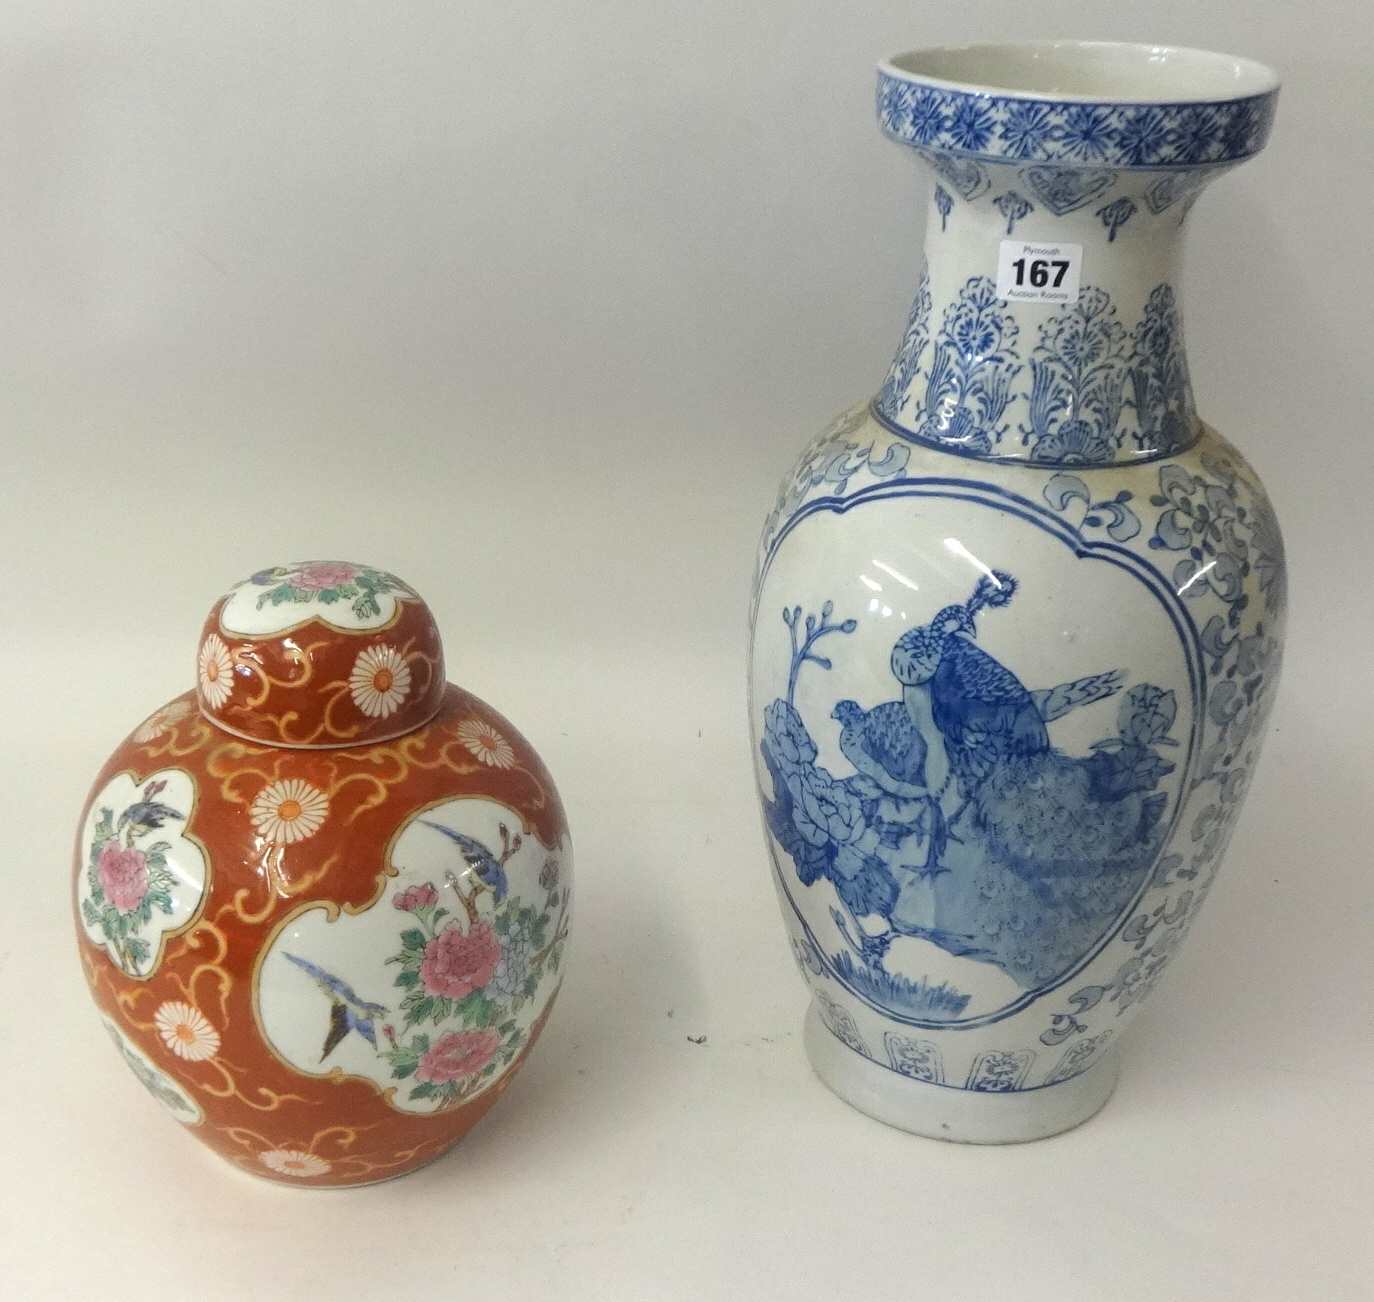 A large reproduction ginger jar and two decorative vases, tallest 51cm